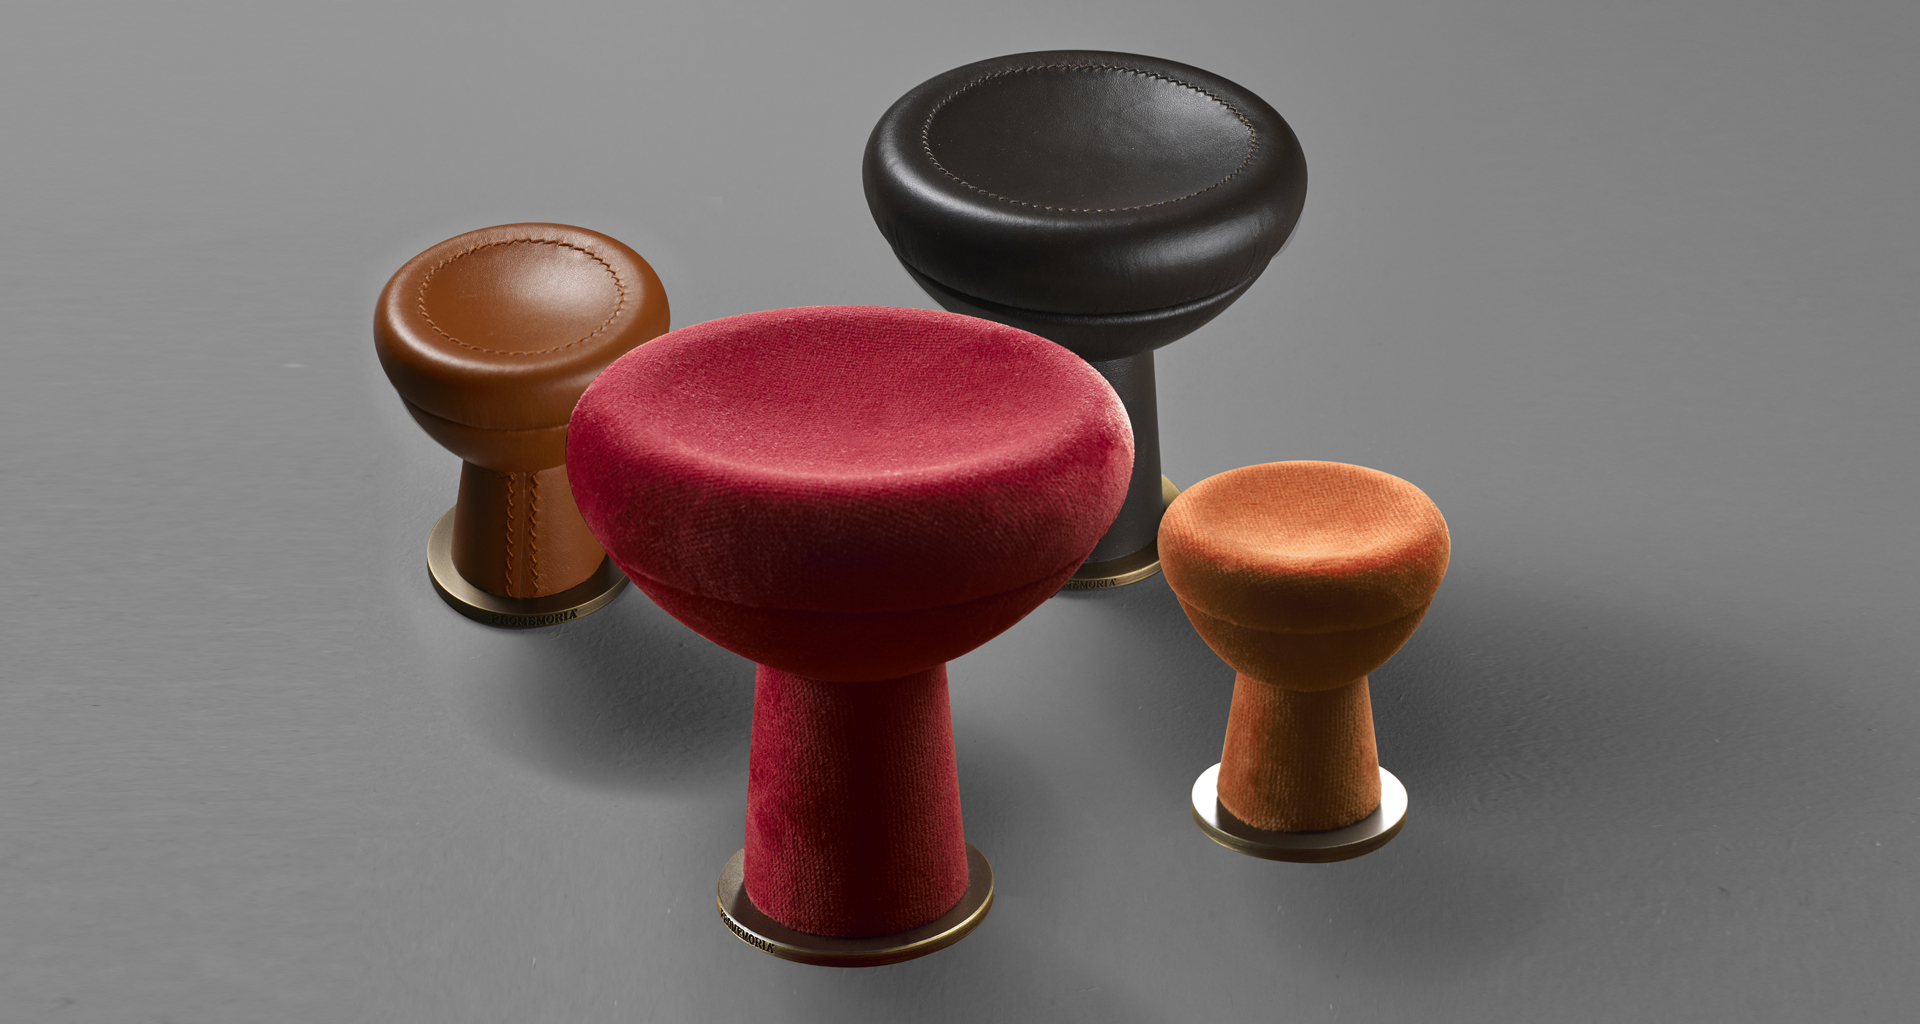 Bottone is a fabric, leather or wooden wall hanger shaped like a button, from Promemoria's catalogue | Promemoria